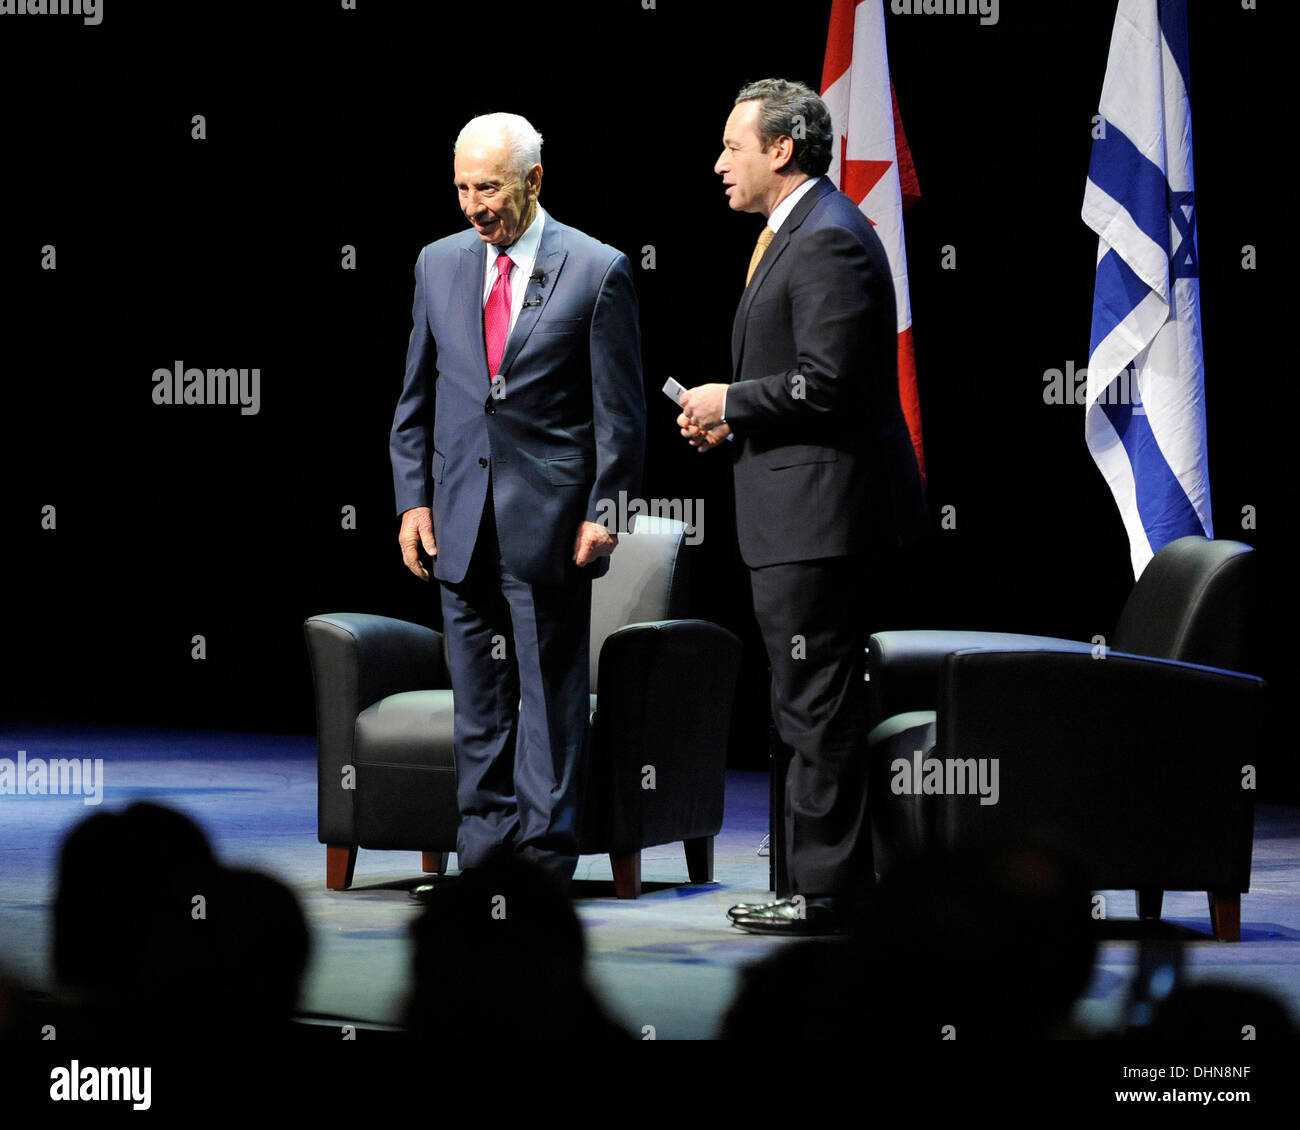 Shimon Peres, President of Israel, and David Frum  An evening with Israeli President Shimon Peres hosted by the UJA Federation of Greater Toronto at The Sony Centre For The Performing Arts.  Toronto, Canada - 09.05.12 Stock Photo